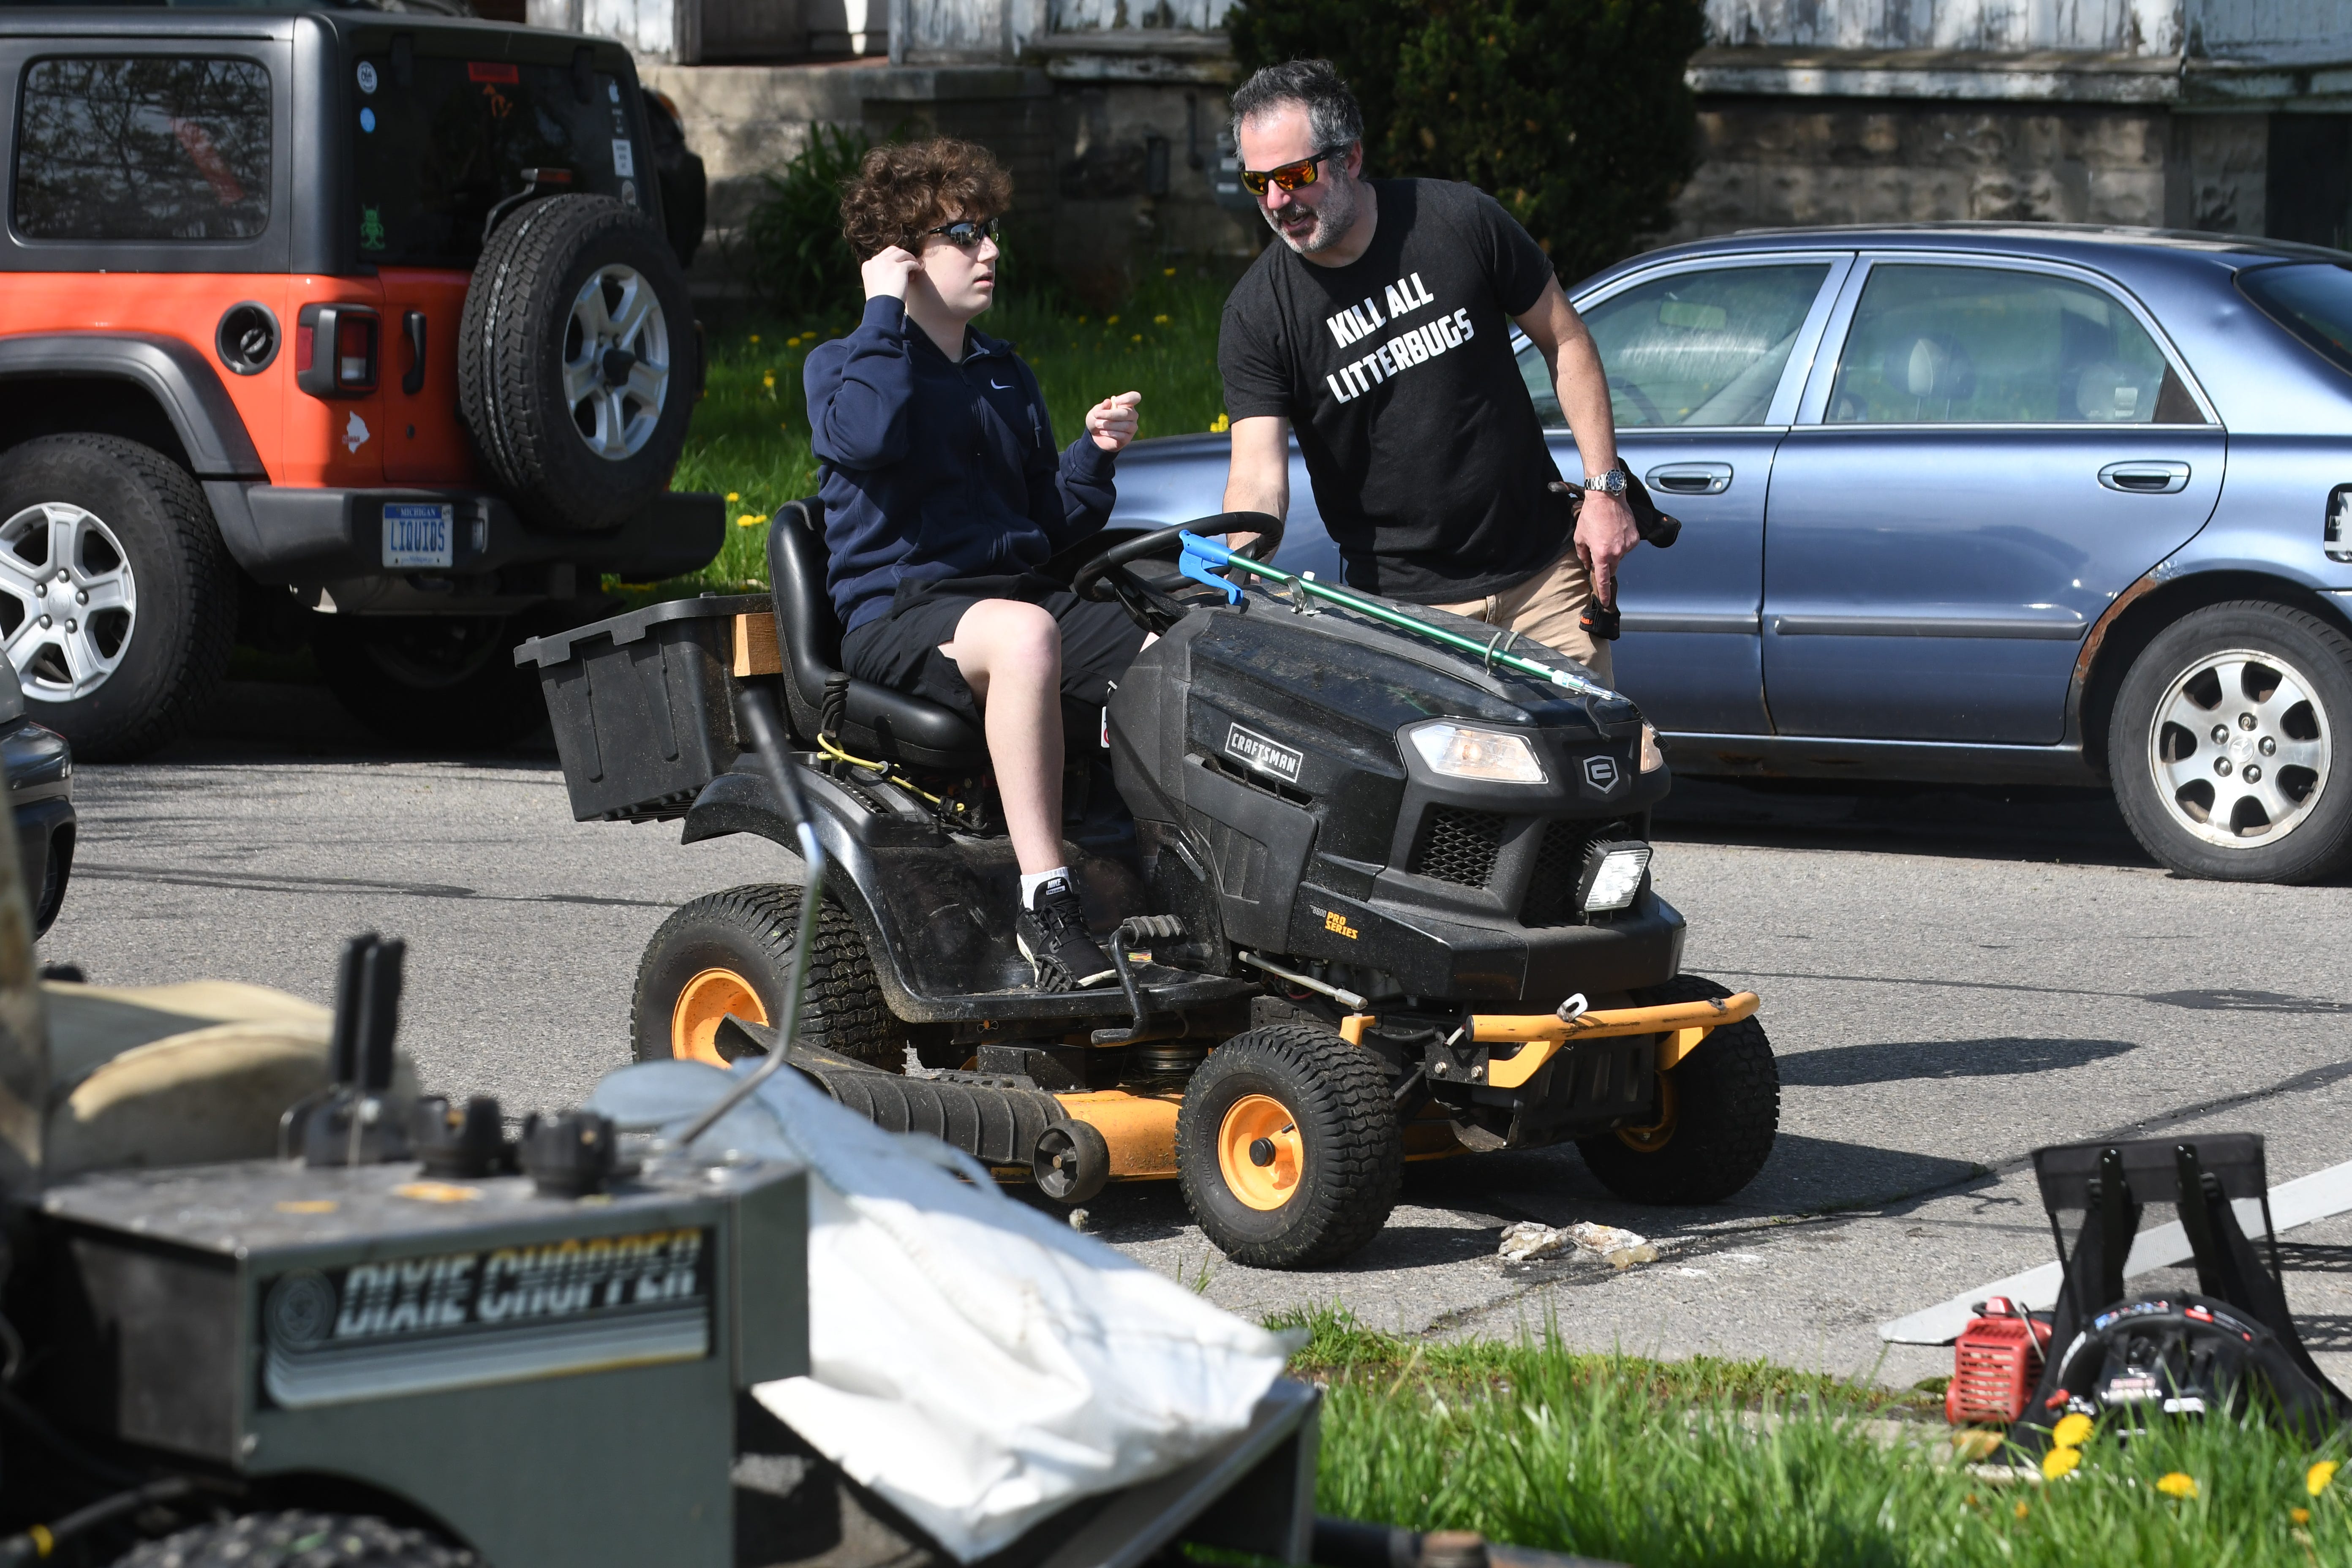 Tom Nardone, founder, Detroit Mower Gang, instructs his son Michael, left, on the cutting path at Hammerberg Playfield for the 2020 Motown Mowdown